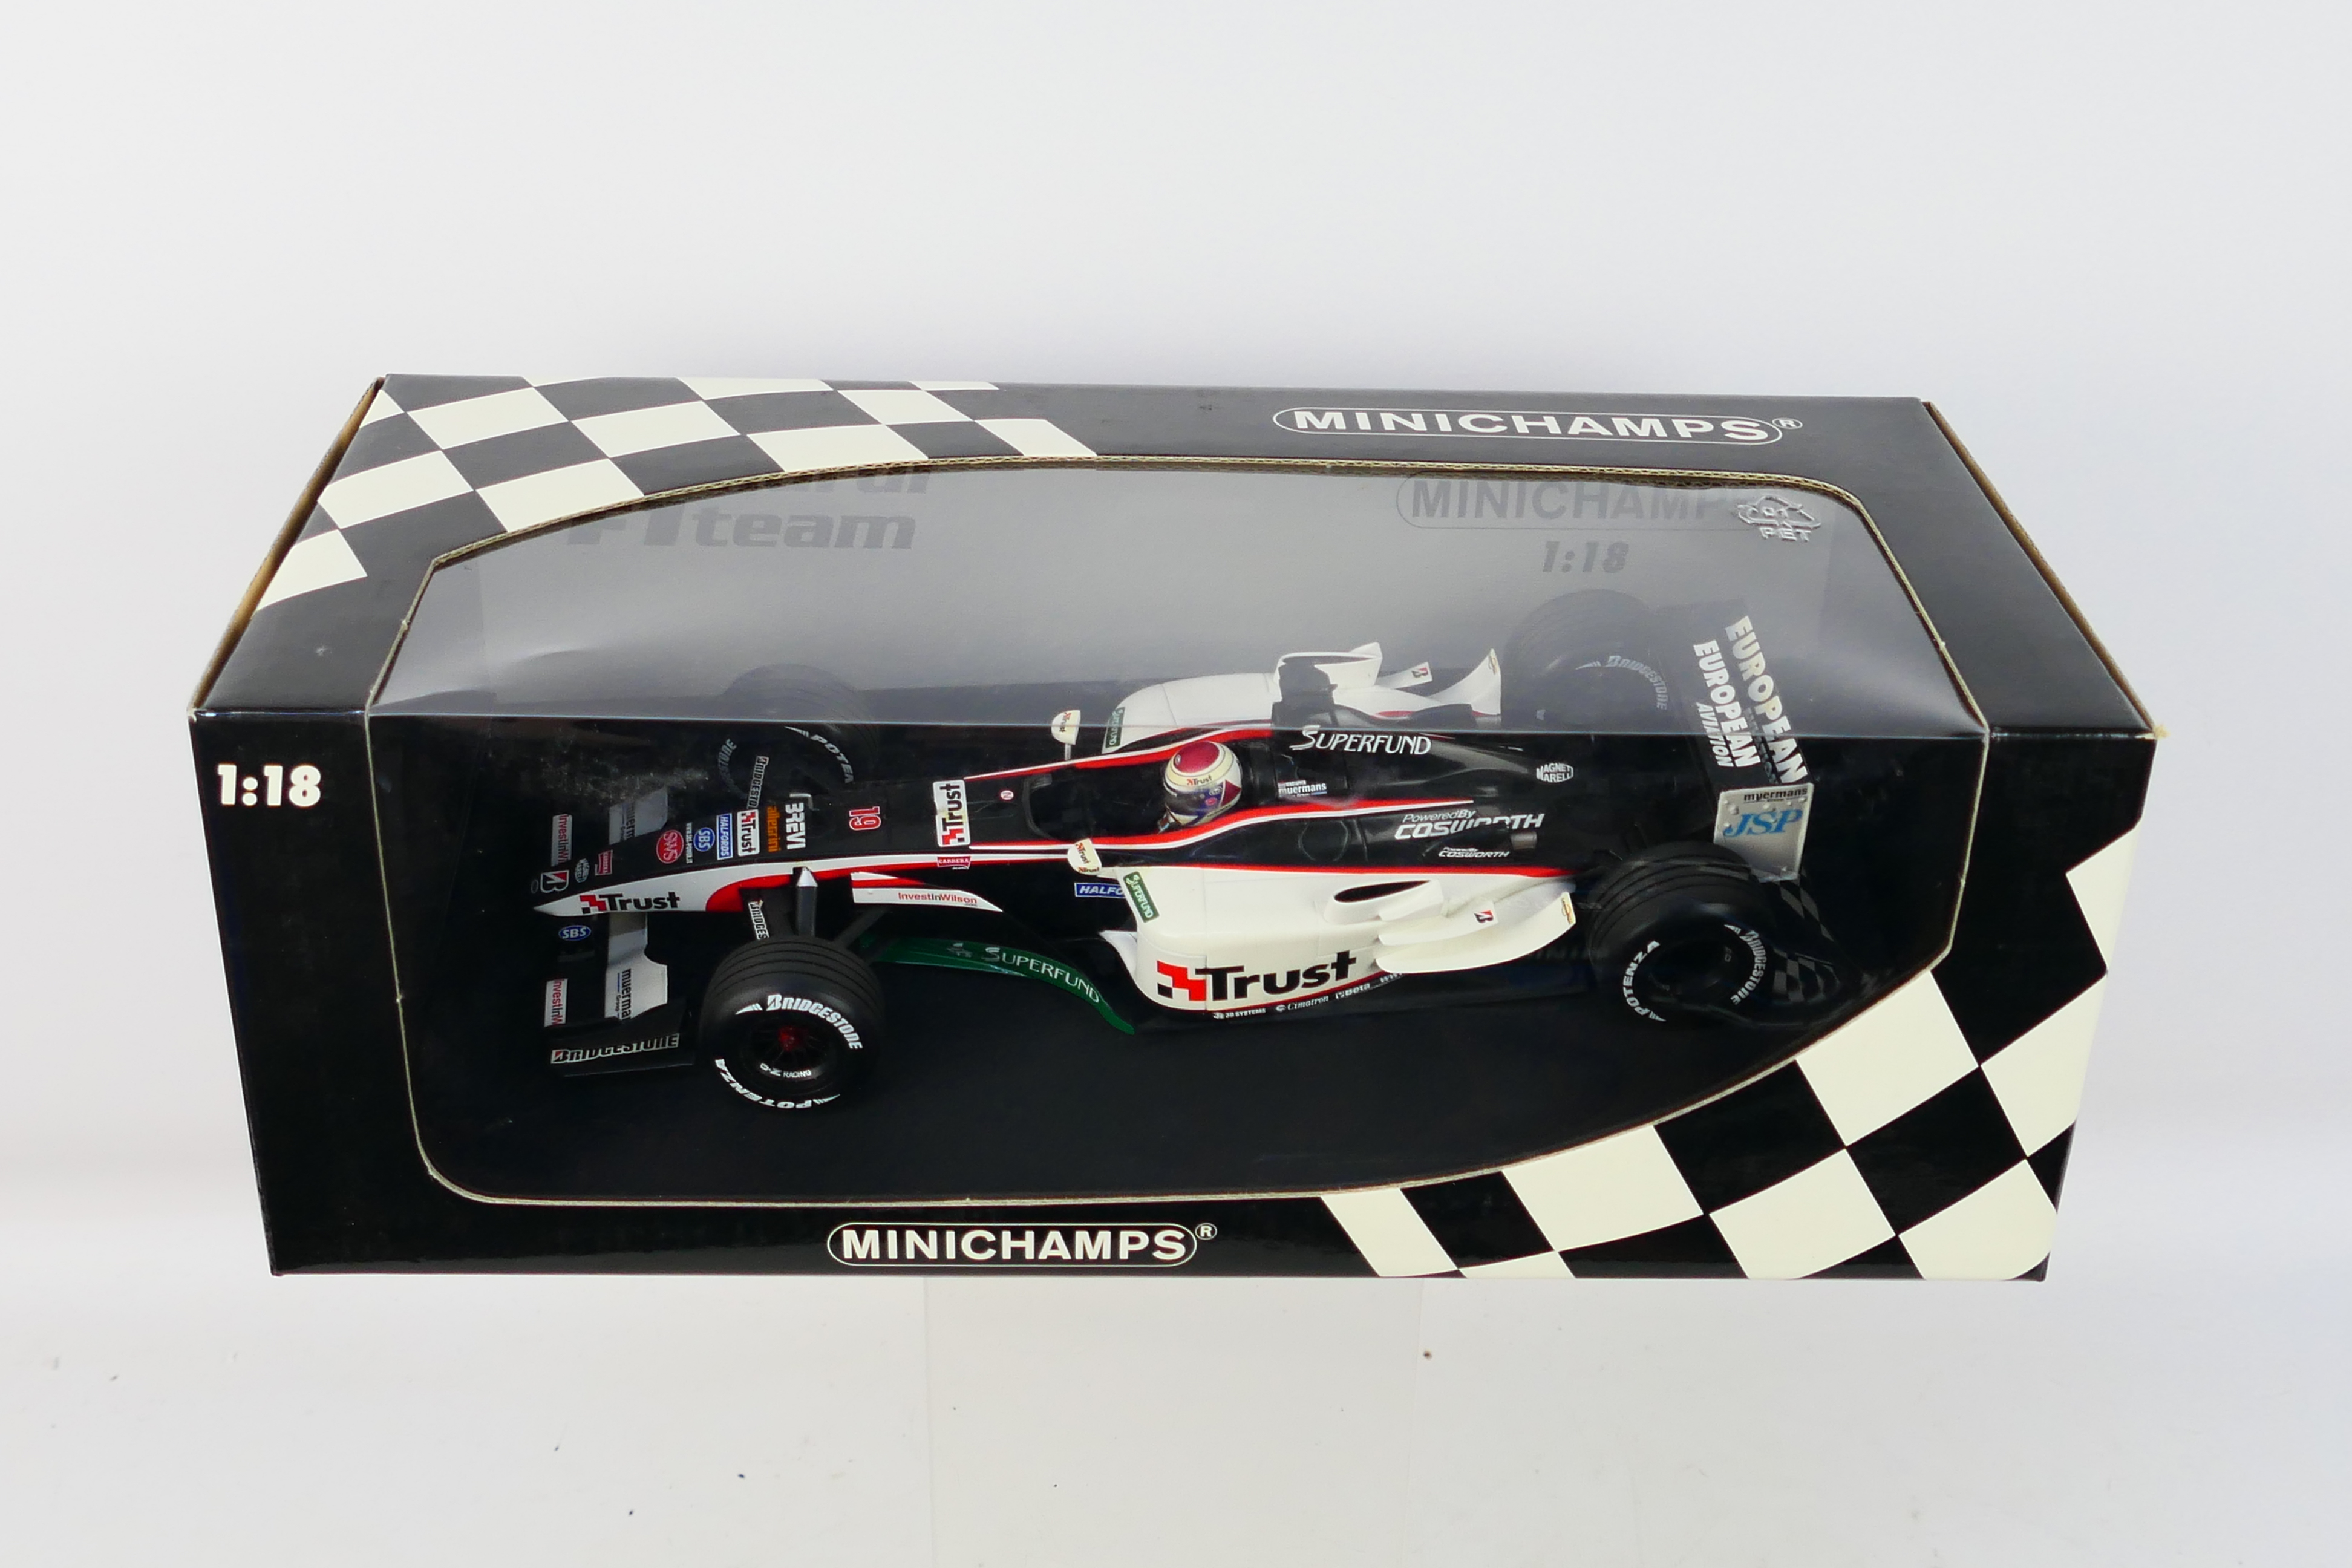 Minichamps- A boxed 1:18 scale European Minardi Cosworth PS03 Jos Verstappen car which appears Mint - Image 3 of 3